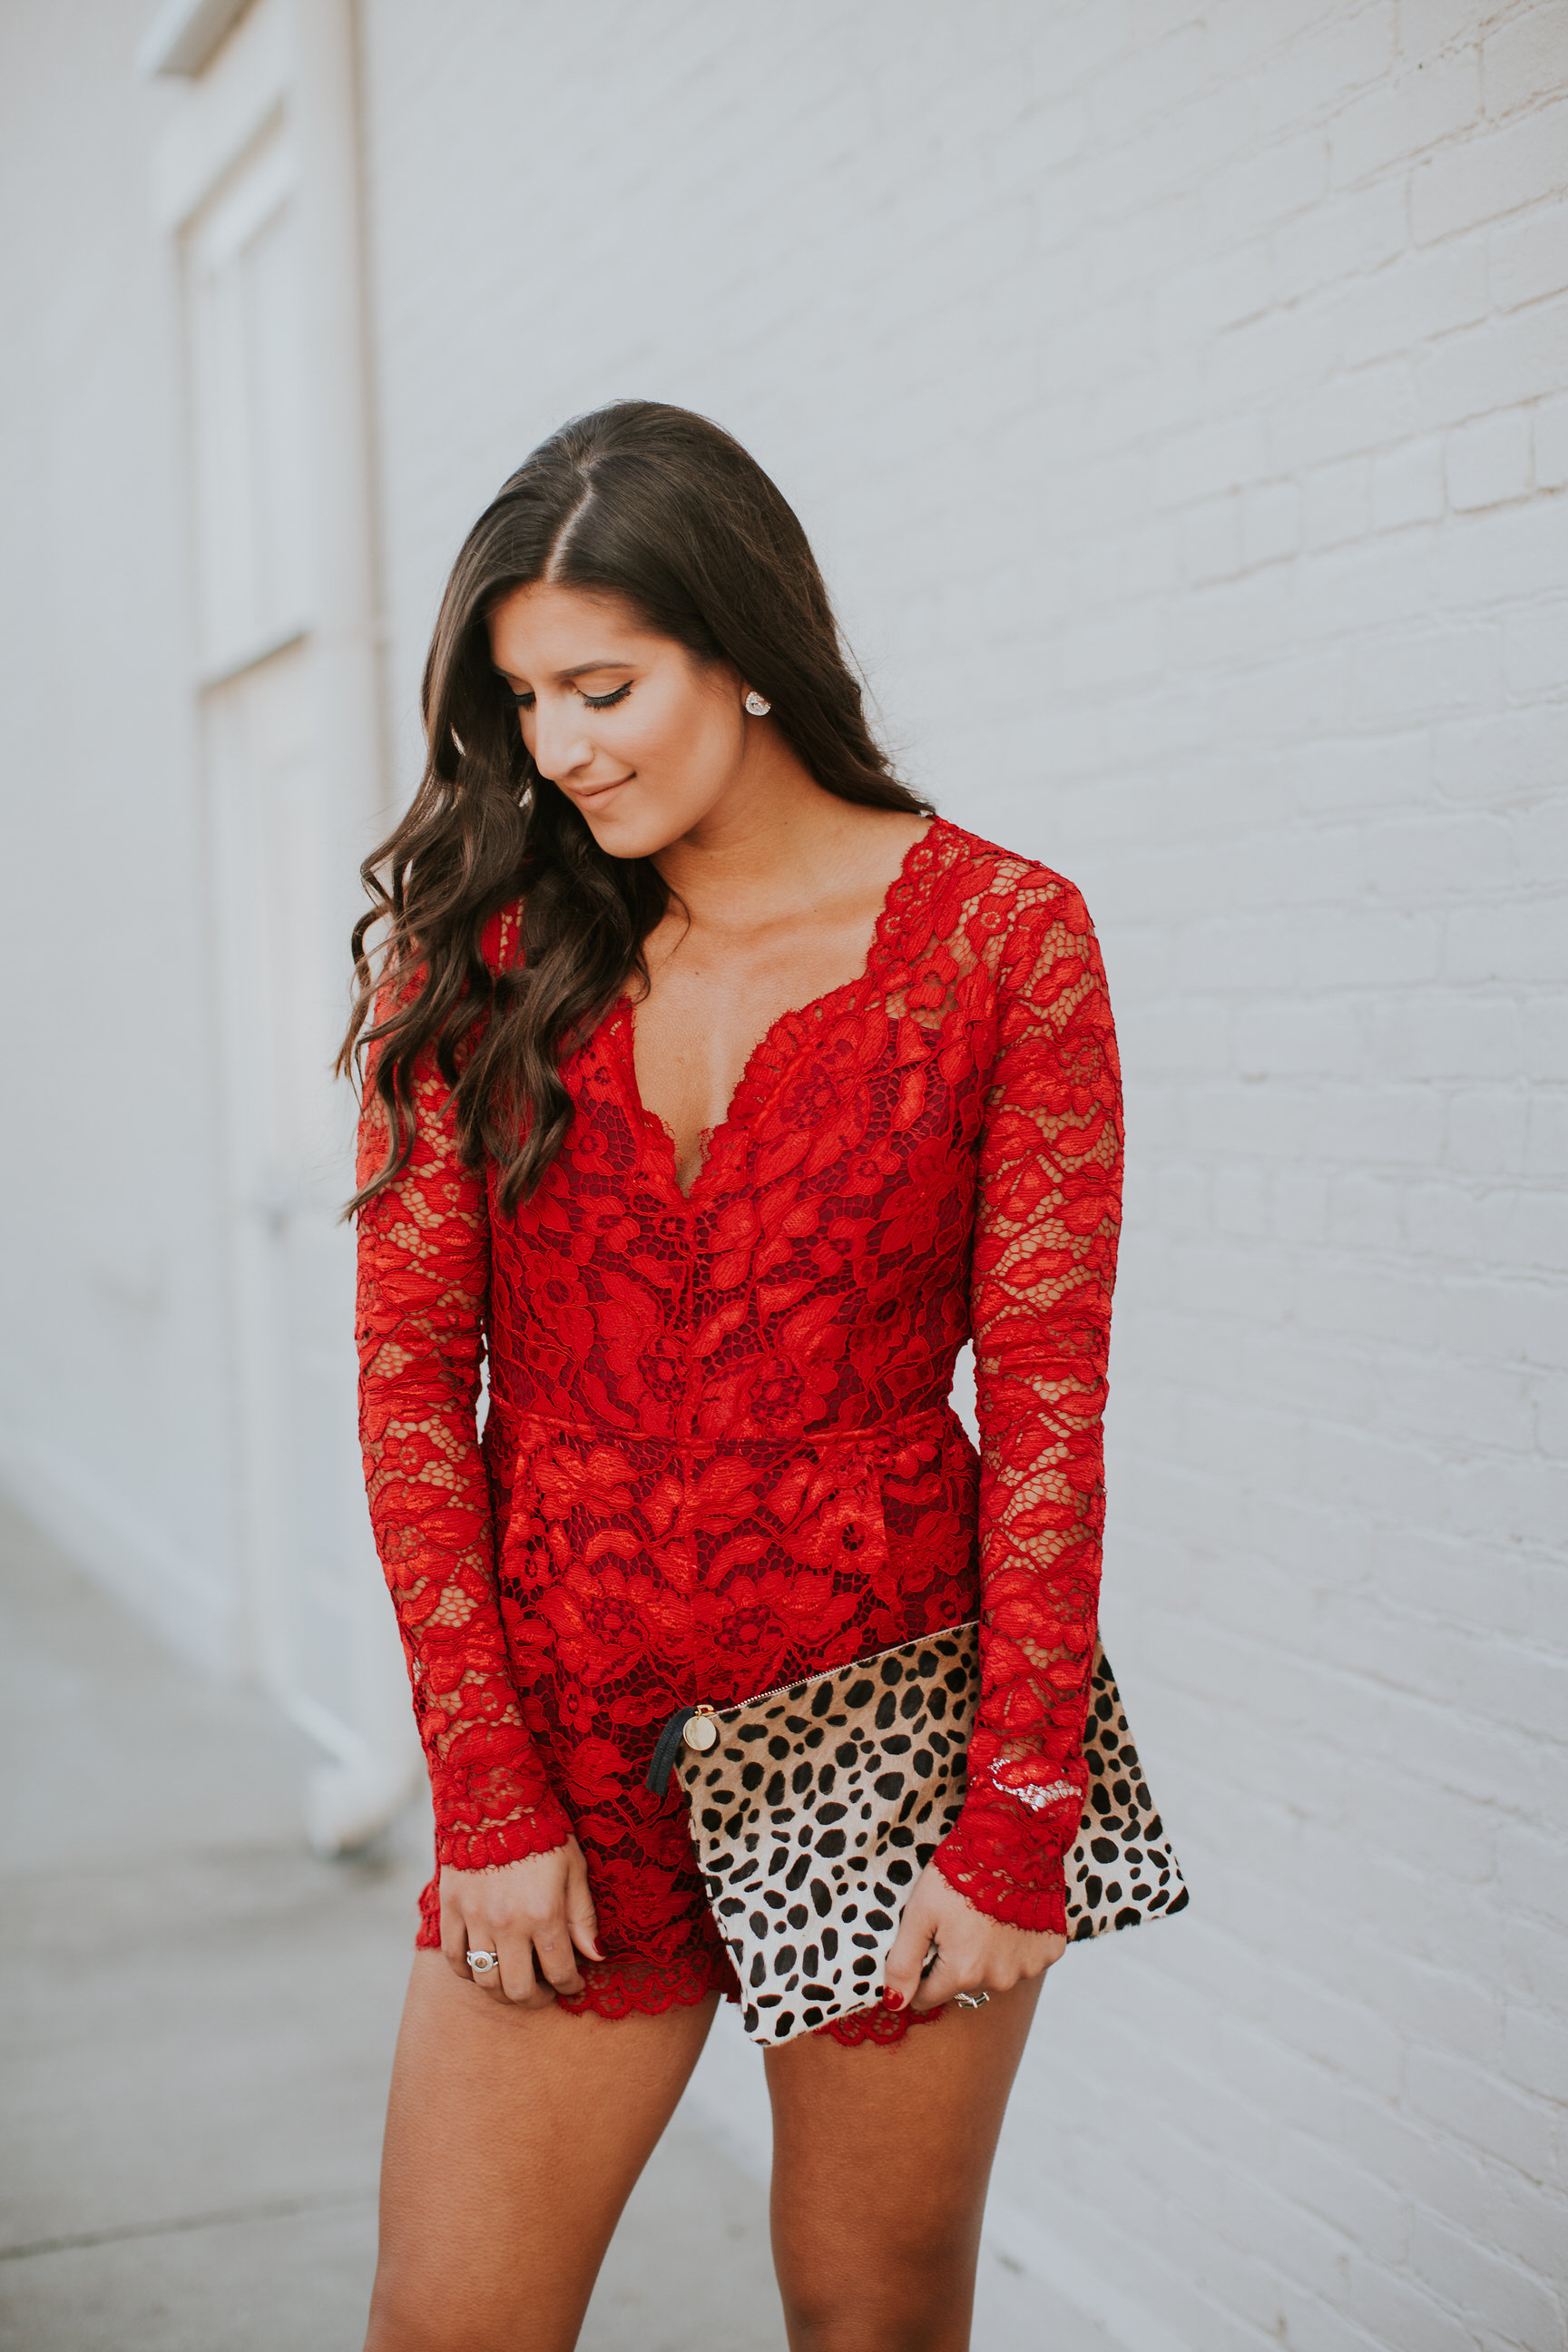 red lace romper, valentine's day outfit, galentine's day outfit, red romper, backless romper, valentine's day outfit, strappy nude sandals, nude strappy sandals, v-neck romper, valentine's day dress, little red dress, red lace dress, leopard clutch // grace wainwright a southern drawl